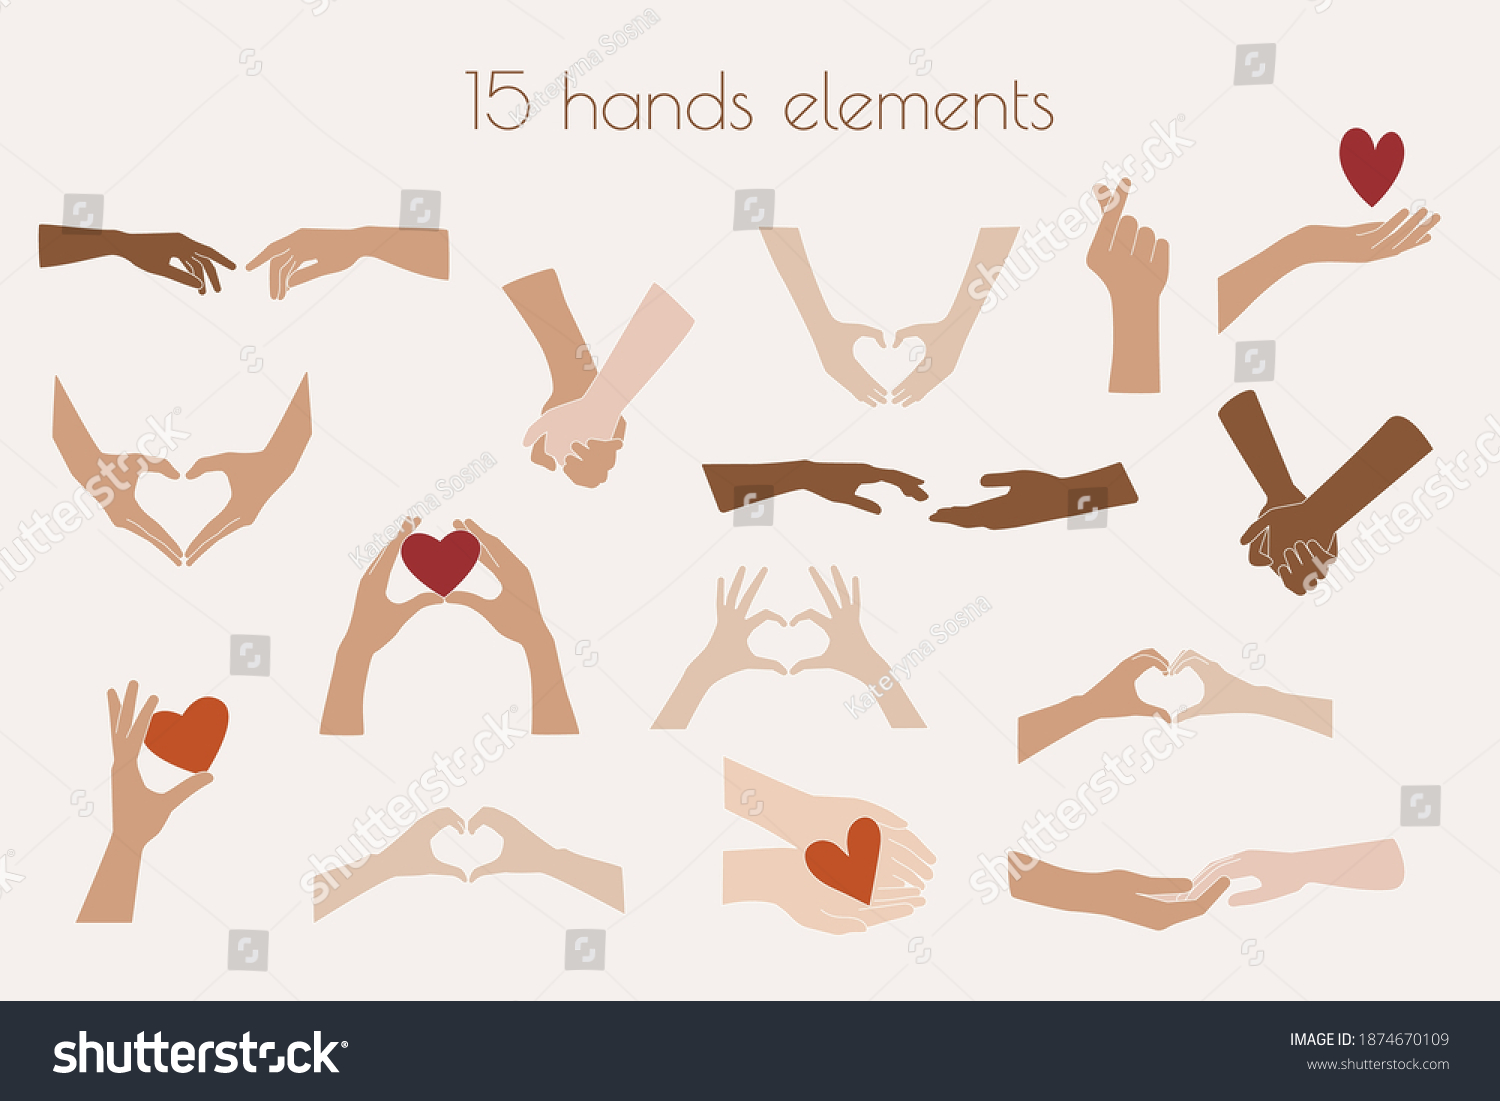 SVG of Hand Clipart Vector Illustrations, Heart Shaped Couples Hands, Holding Hands Illustrations, Hands Graphics, Love Valentines Day SVG svg